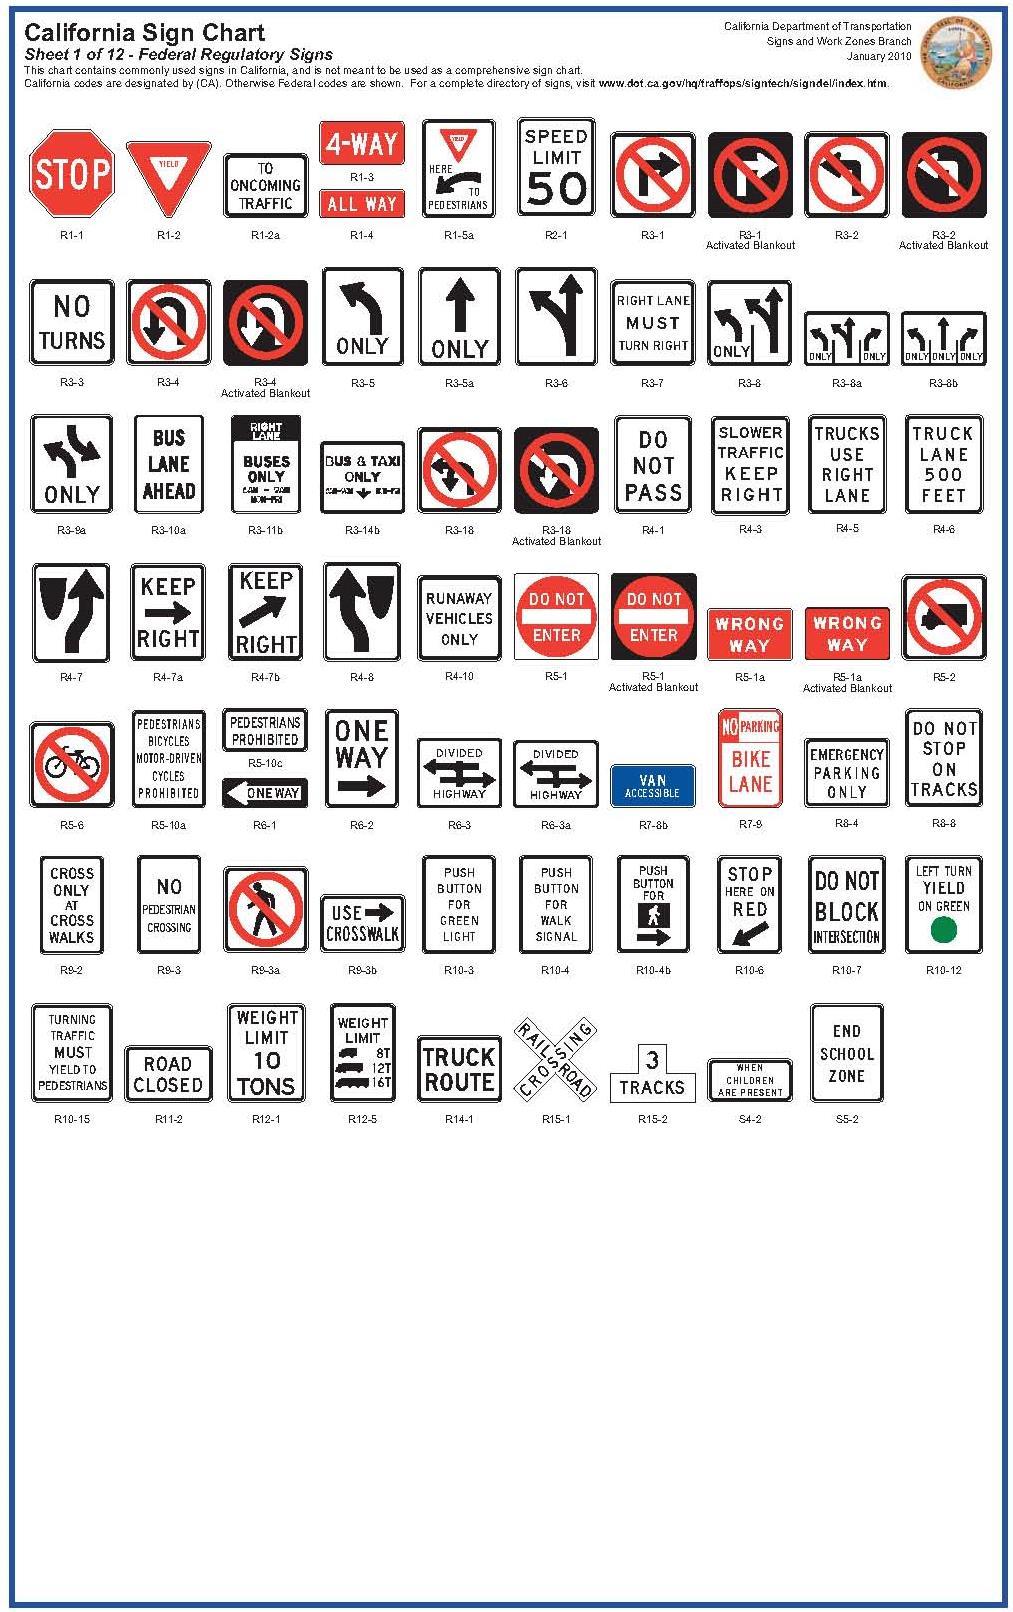 Note: The California Sign Chart contains commonly used signs in California, and is not meant to be used as a comprehensive sign chart.